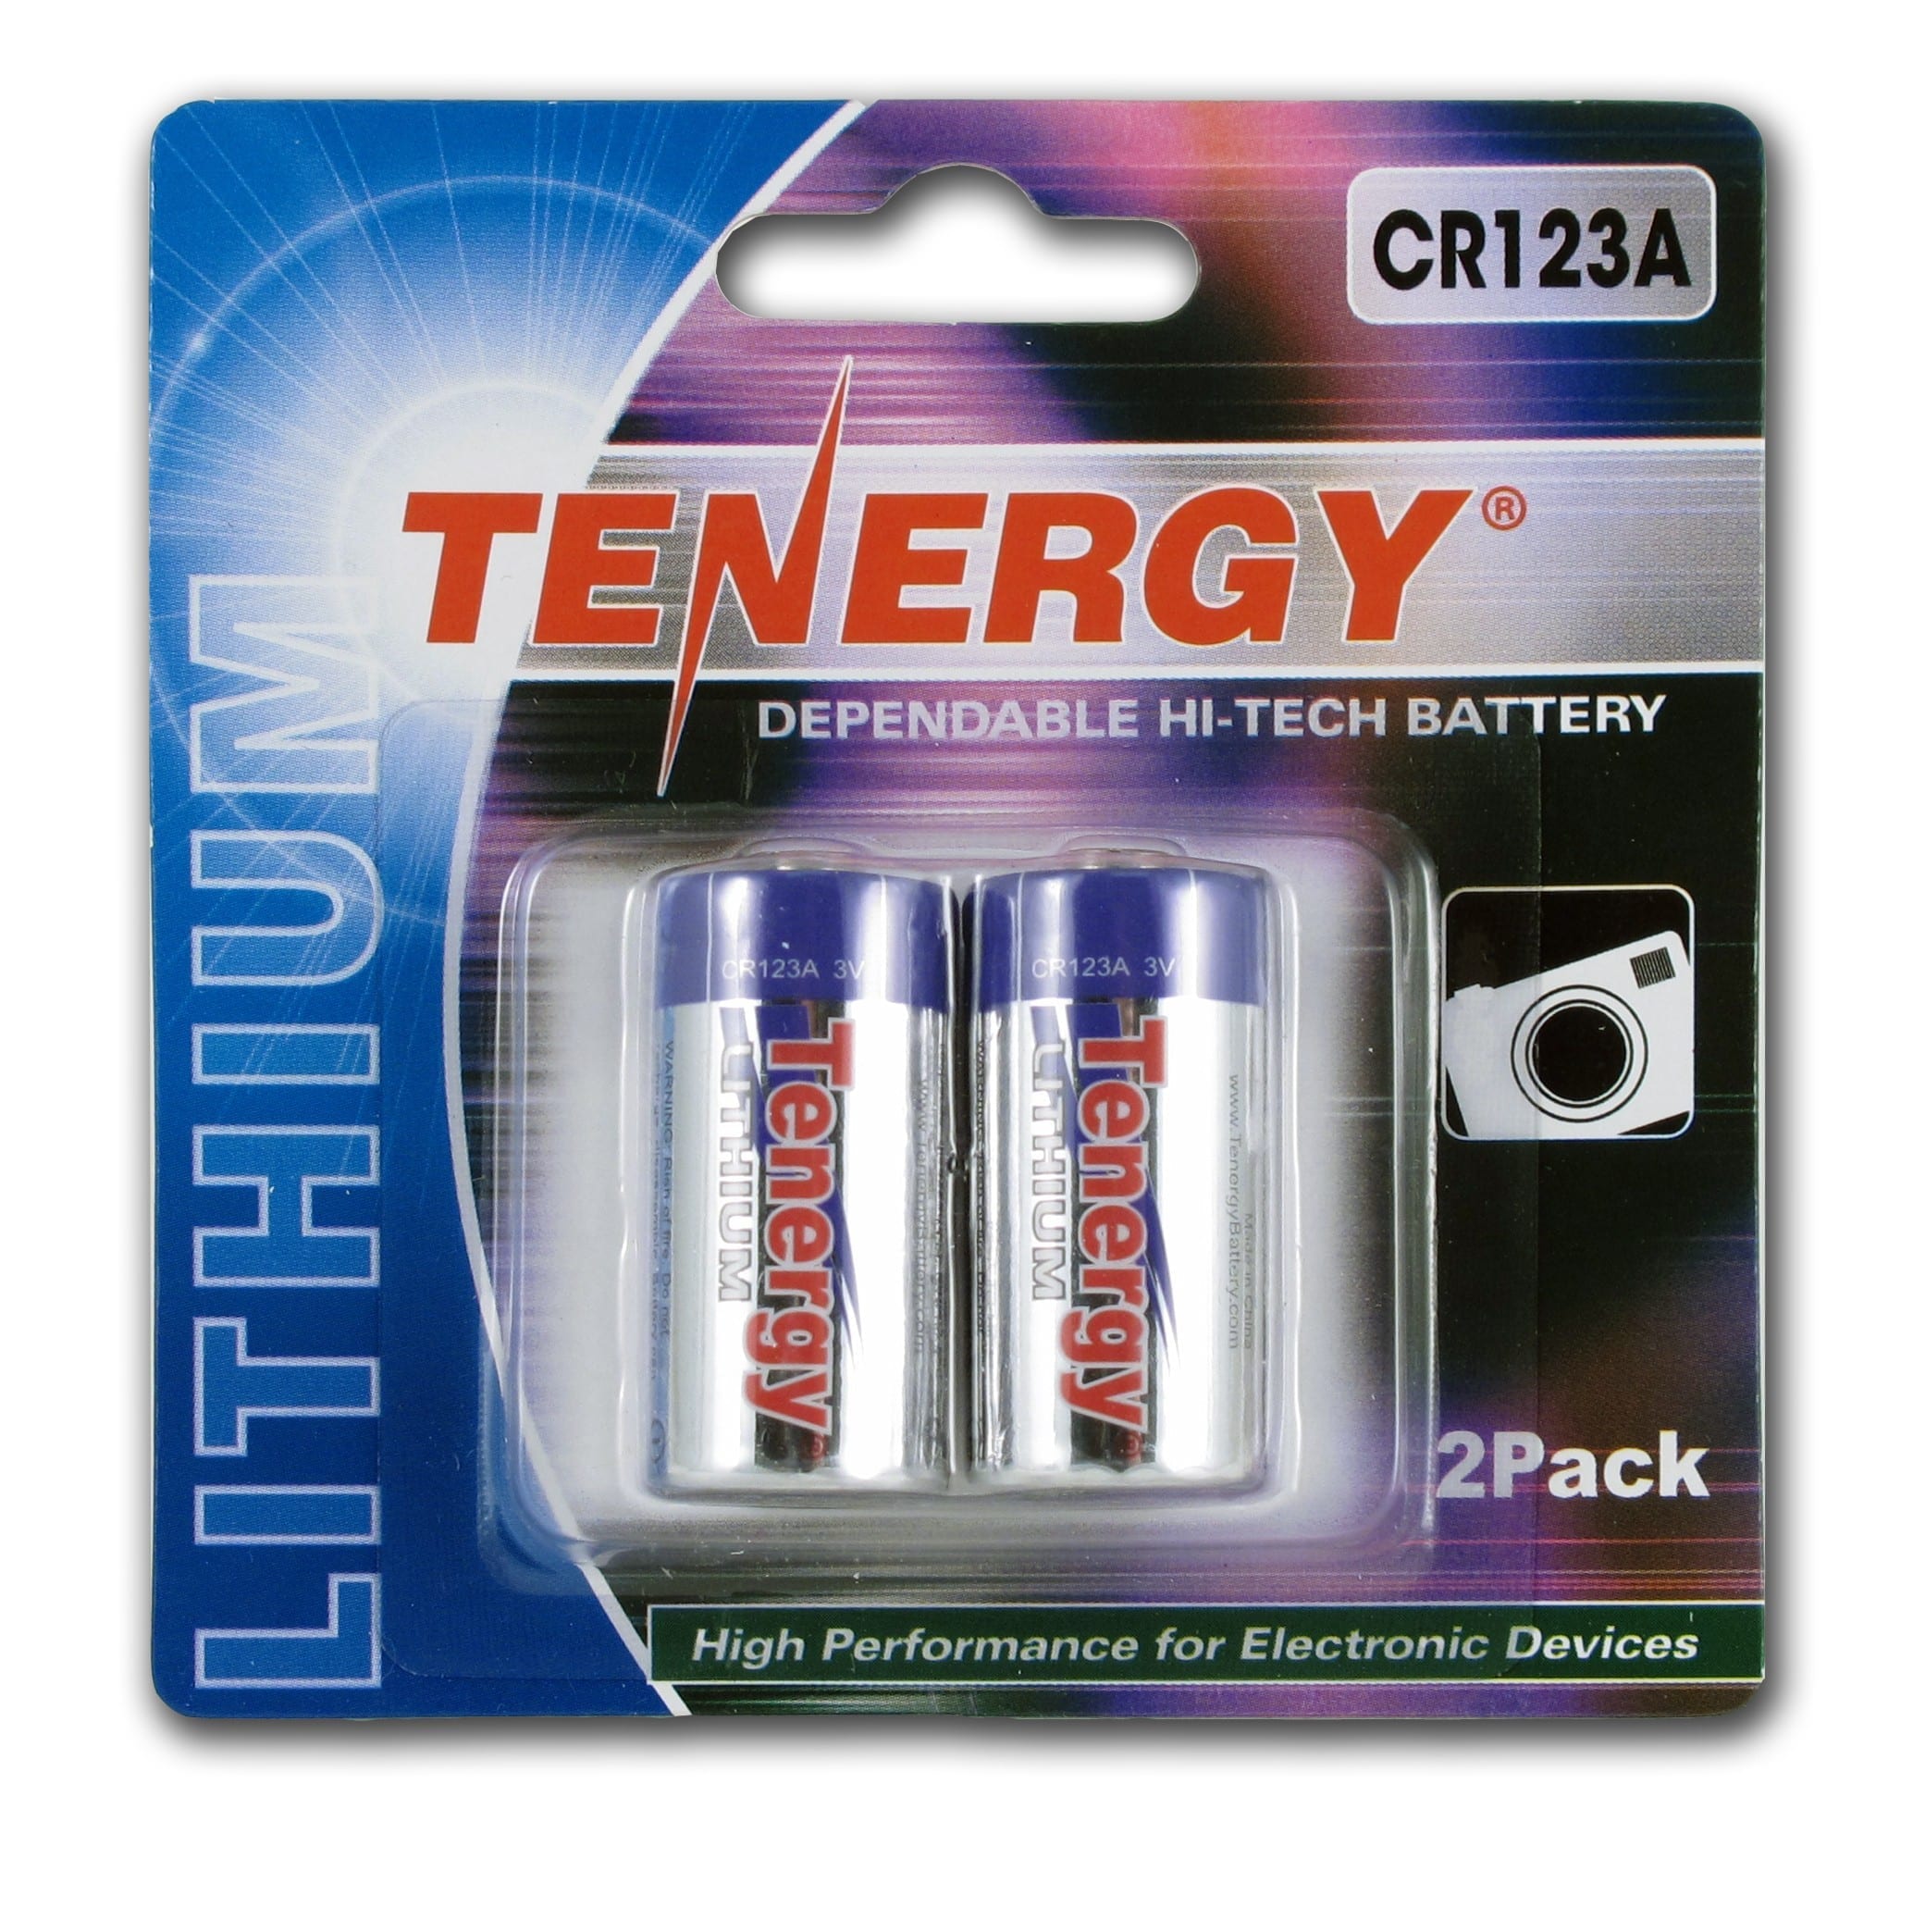 CR123A Lithium Batteries 1500 mAh - pack of 2